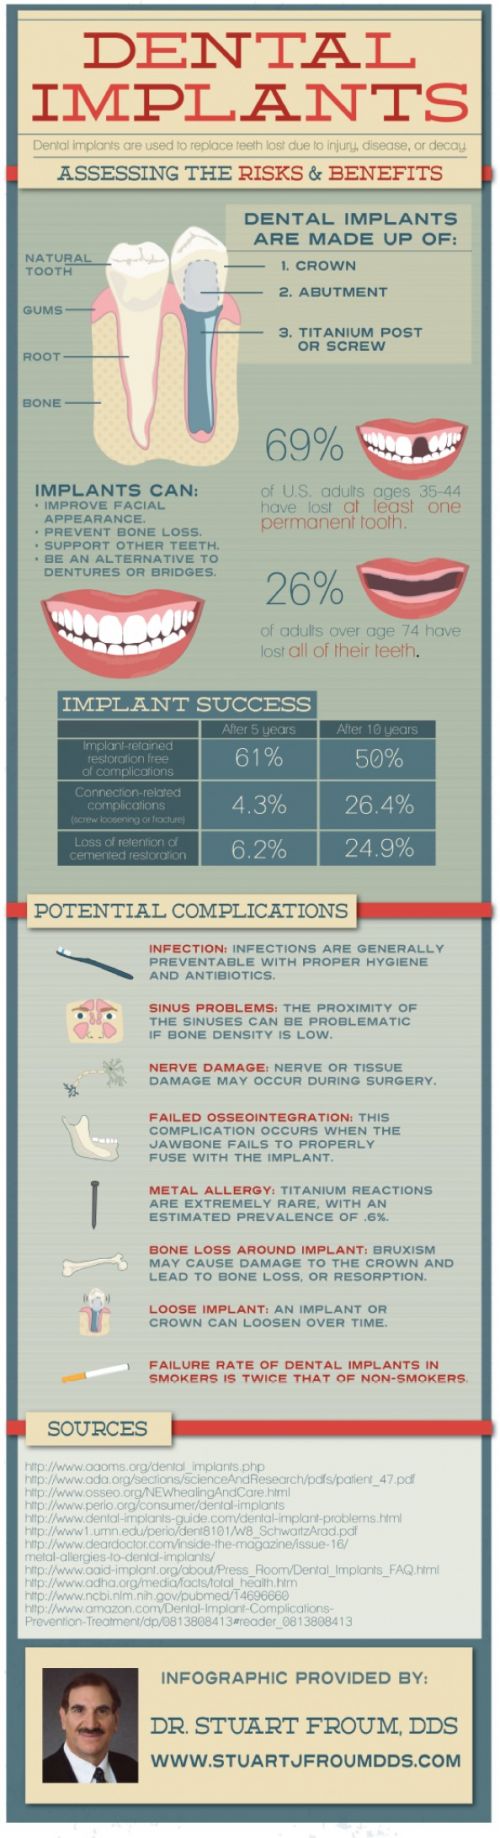 7 Jul 2012  Common dental implants risks and side effects include problems with implant   integration, infection, nerve and tissue damage, and placement 